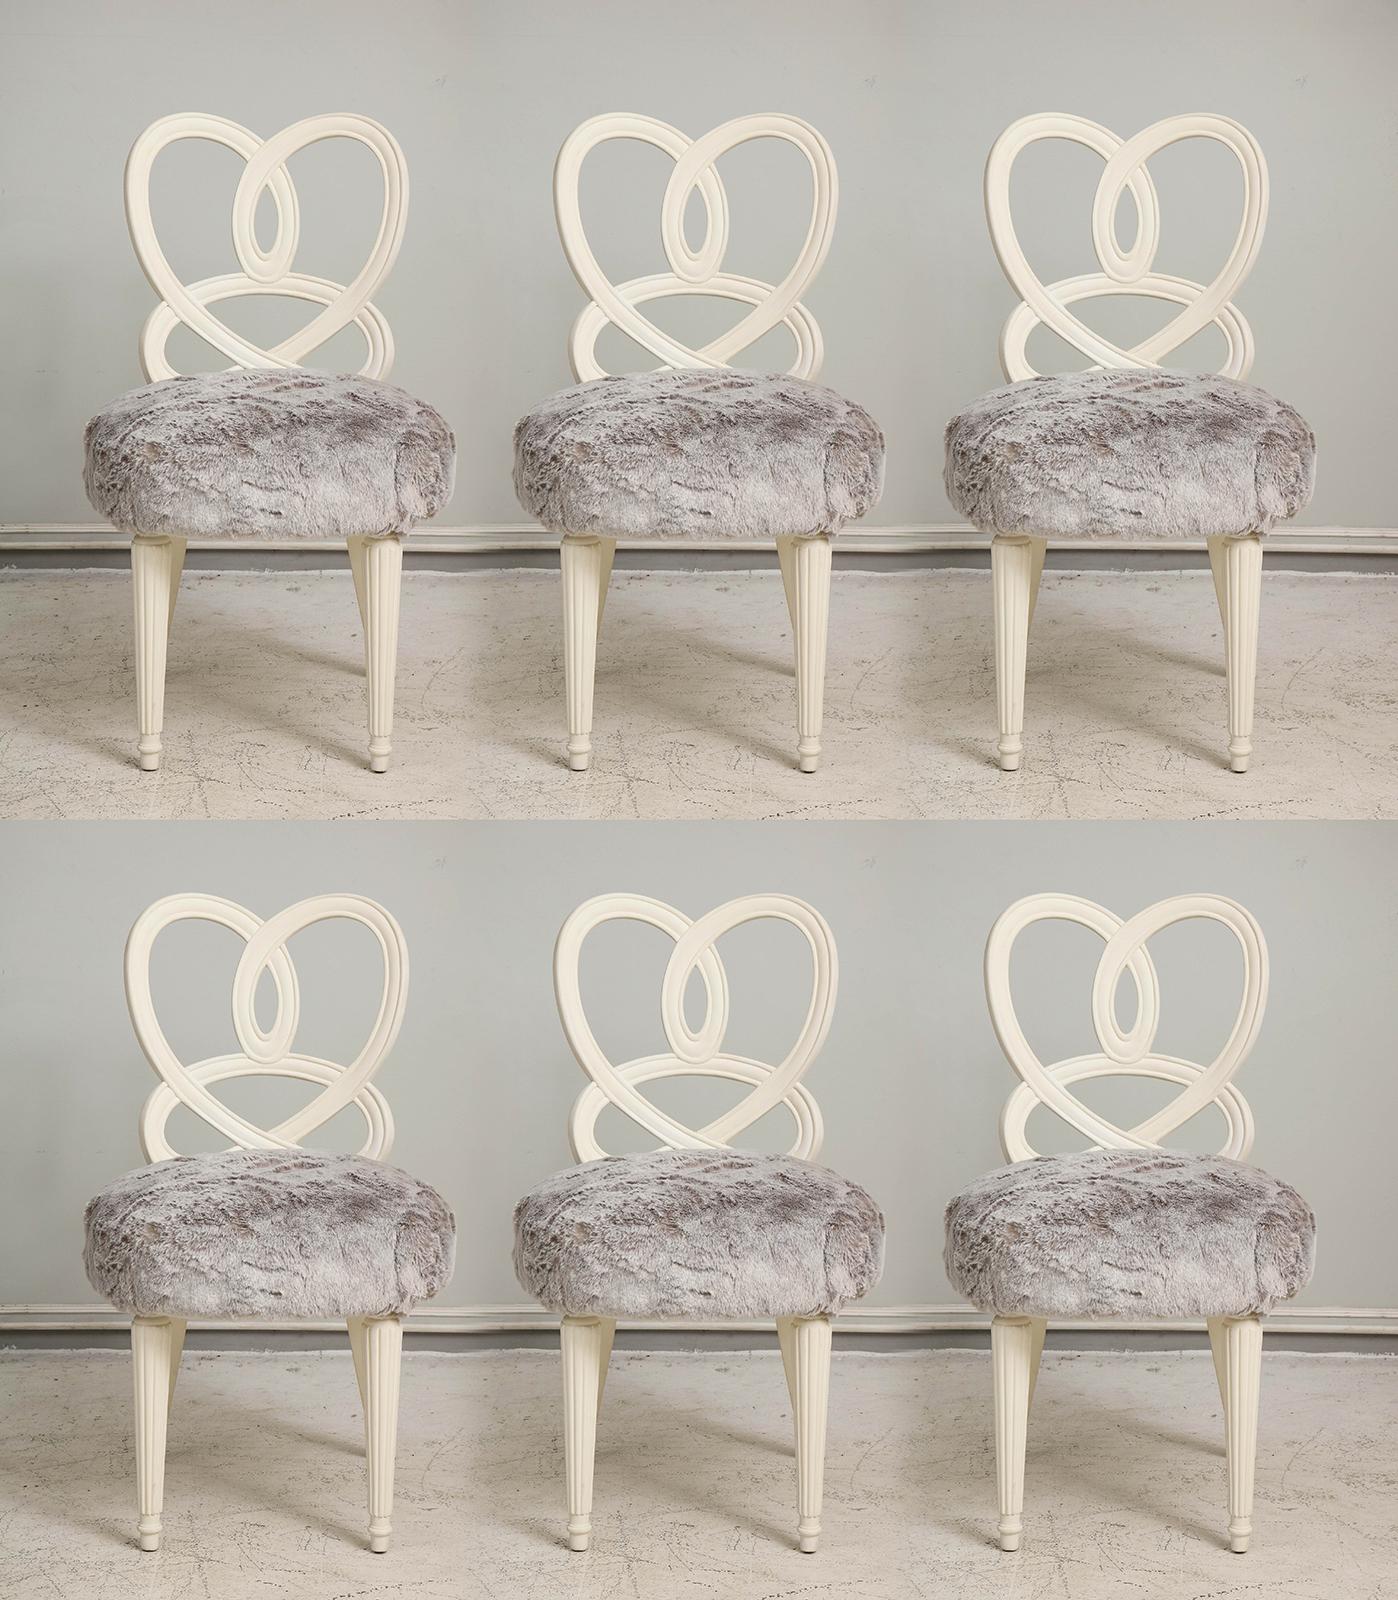 Set of 6 vintage Hollywood Regency chairs upholstered in faux fur.